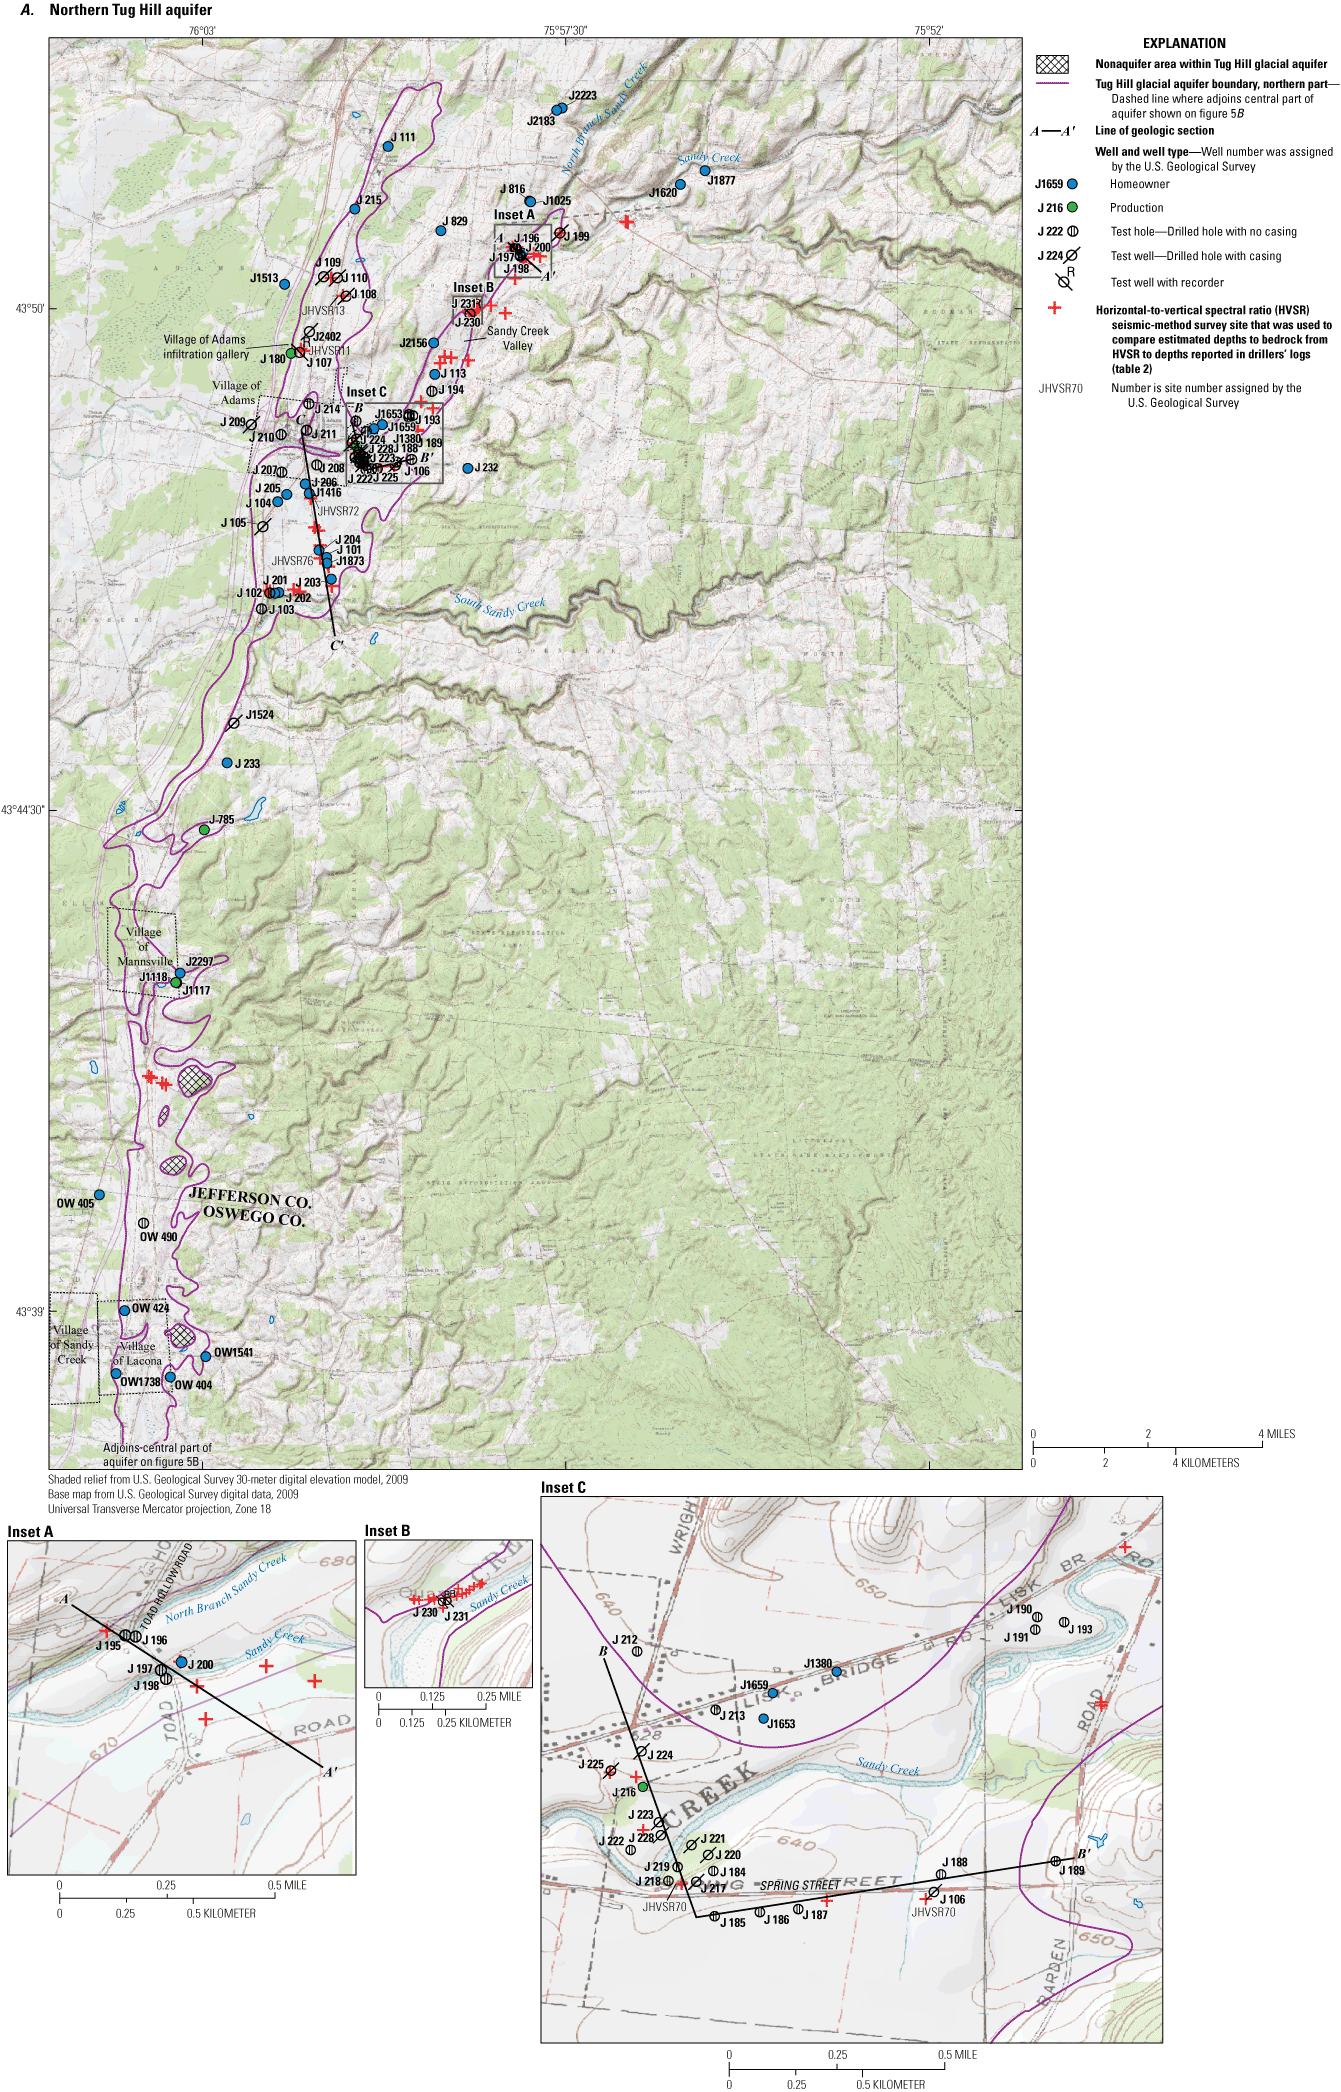 Locations of wells, seismic survey stations, and cross sections.